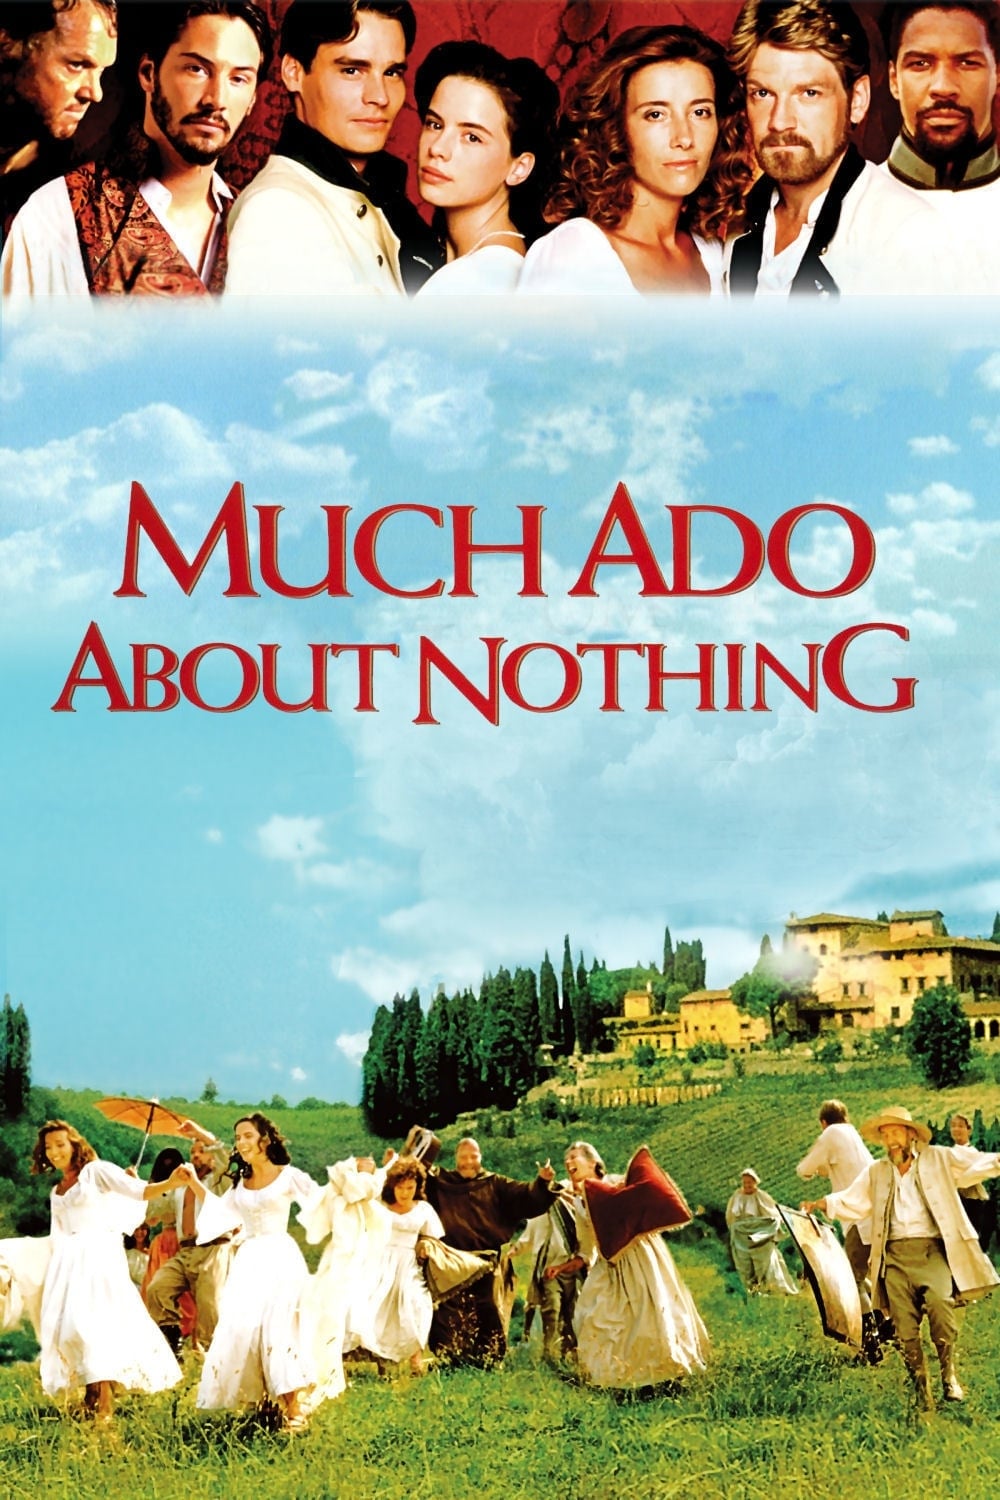 File:Poster for the 2011 production of Much Ado About Nothing